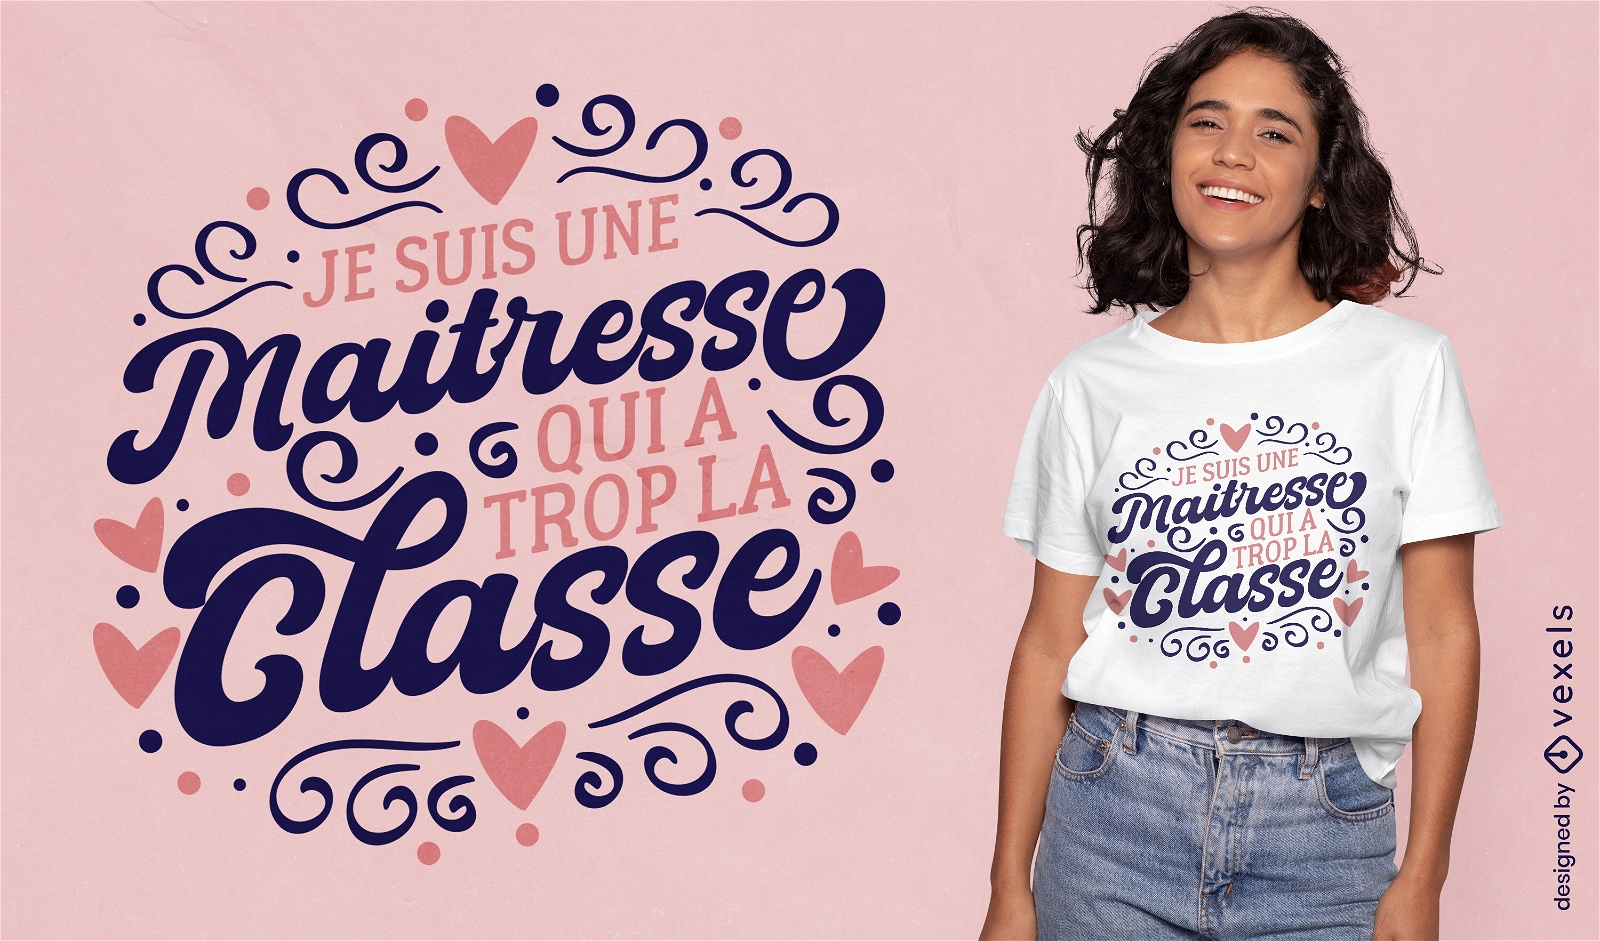 Classy mistressfrench quote  t-shirt design